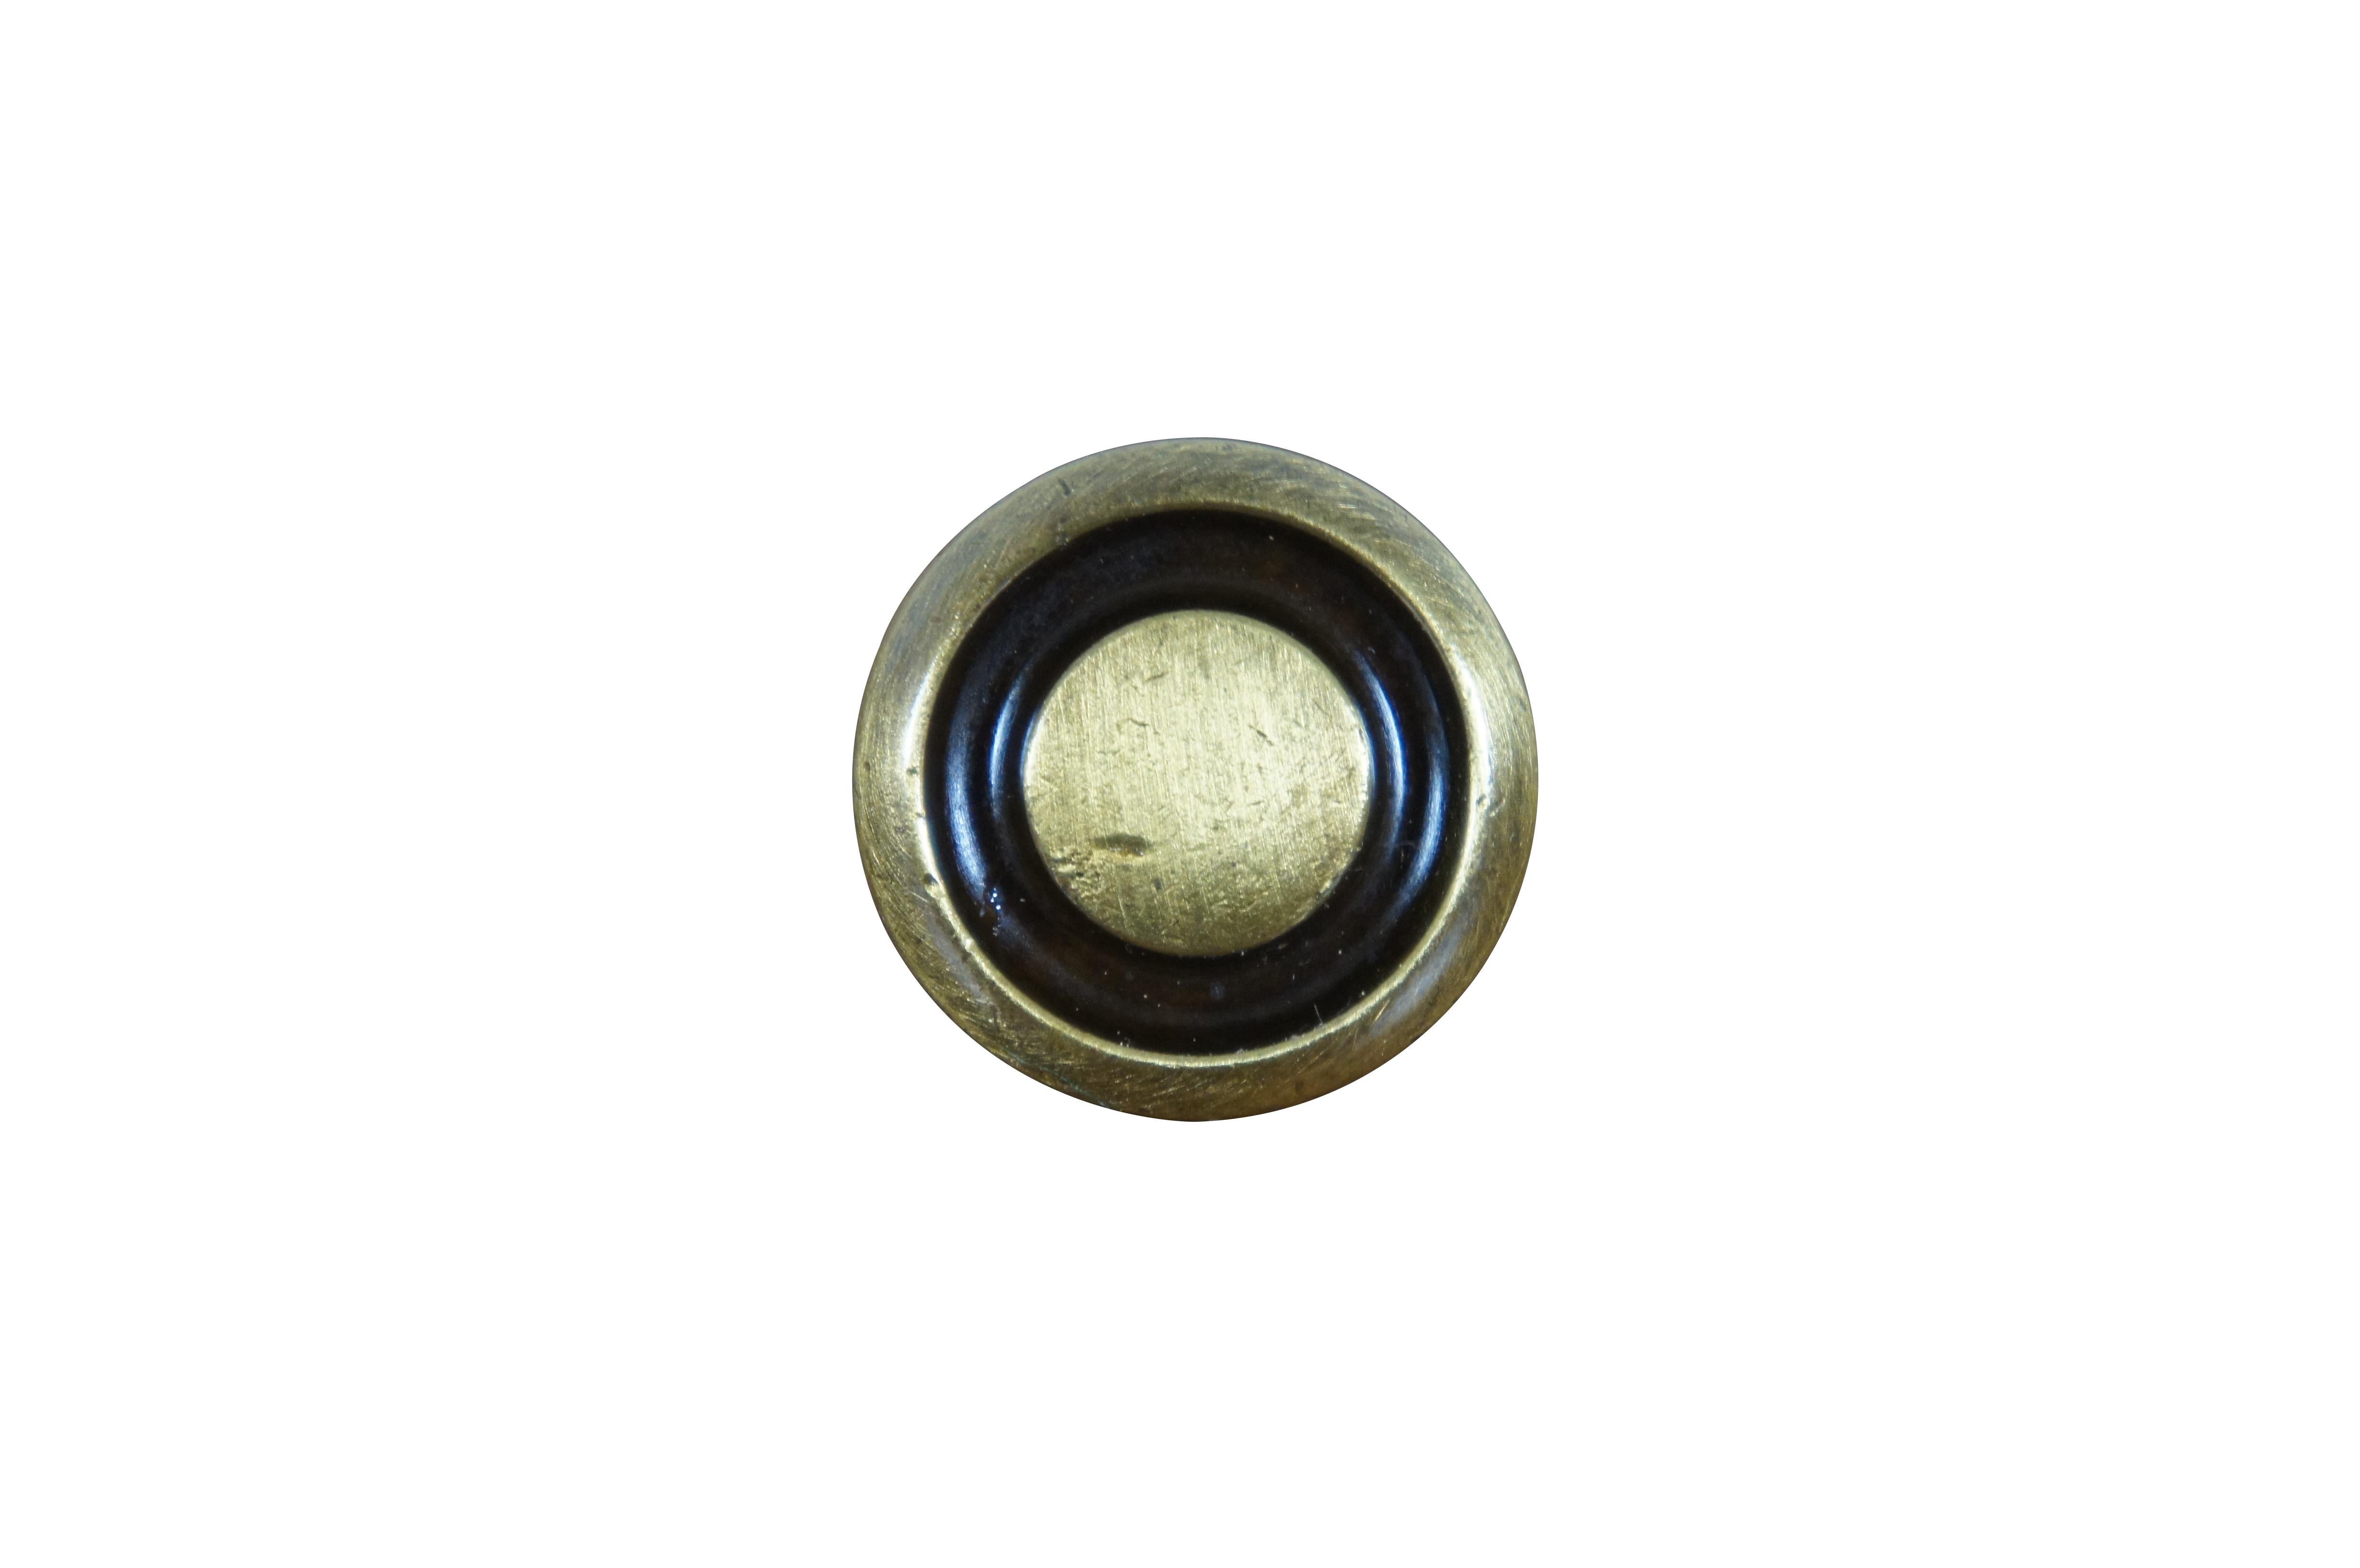 23 Available - Mid to late 20th century old-stock drawer / cabinet pulls. National Lock Company - Medalist, item number C274-4A Knob, Antique Brass. Round button shape with dark, recessed groove. 

Dimensions:
1